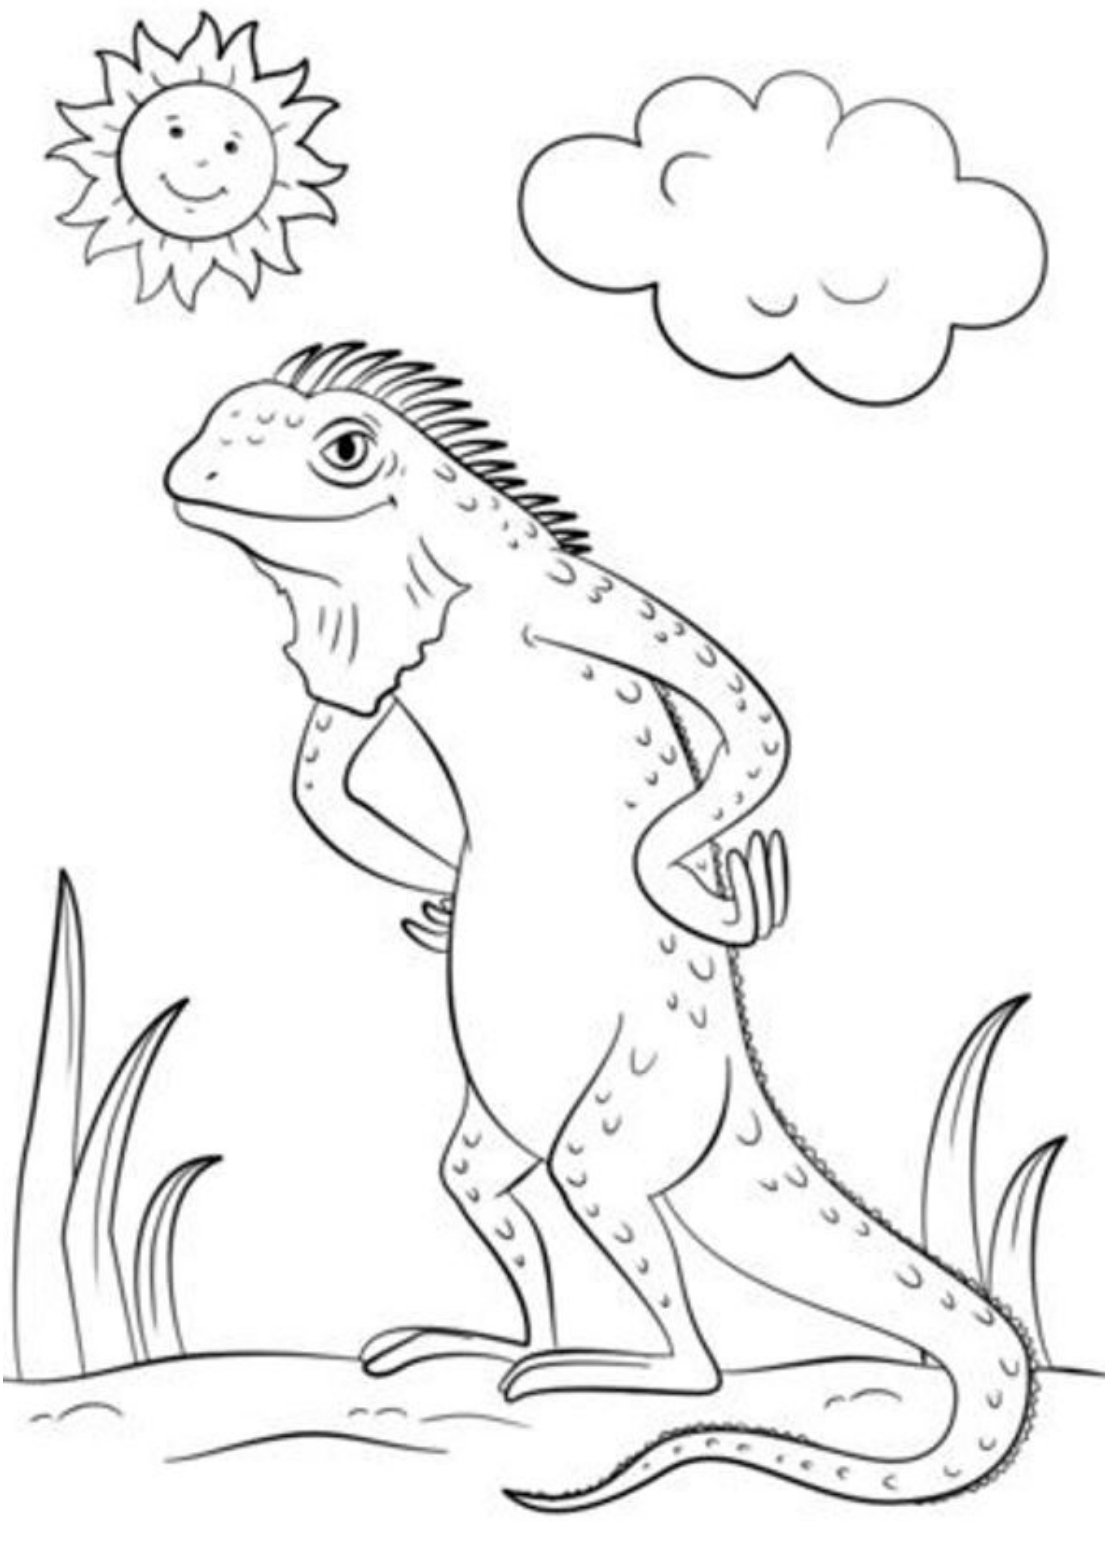 Drawing 10 from iguanas coloring page to print and coloring